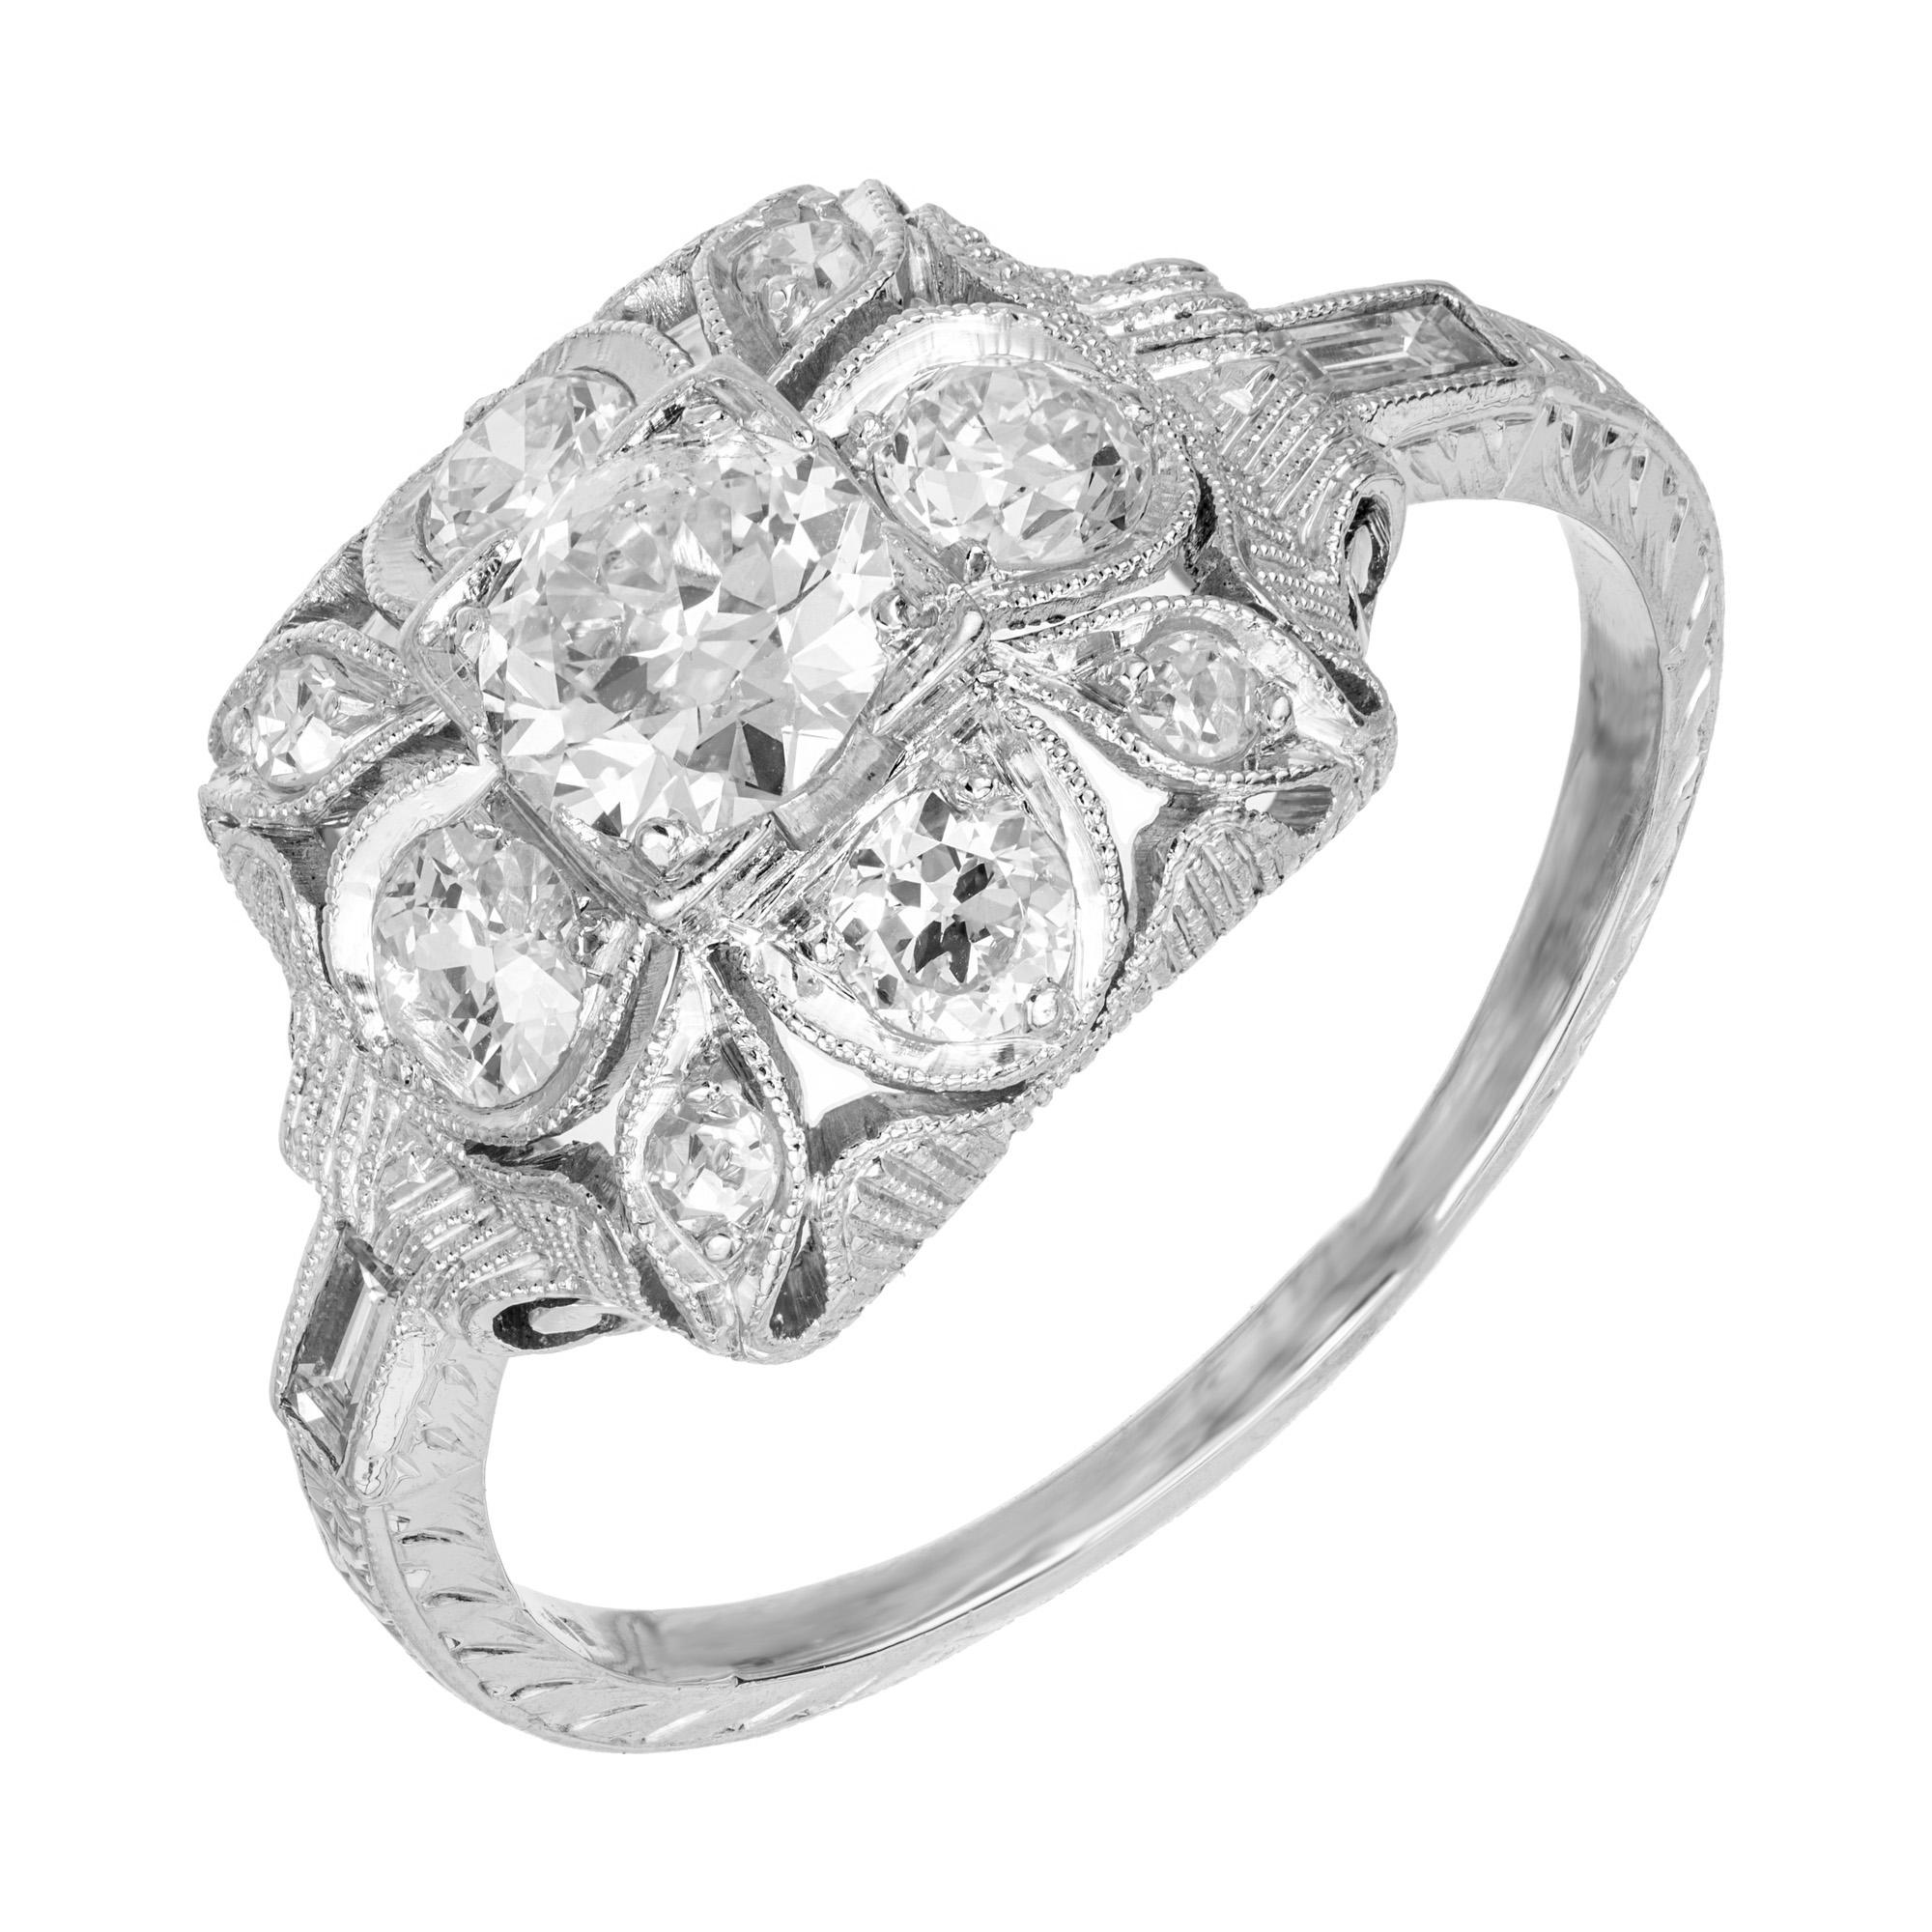 1.00 Carat Old European Cut Diamond Platinum Pierced Antique Engagement Ring In Good Condition For Sale In Stamford, CT